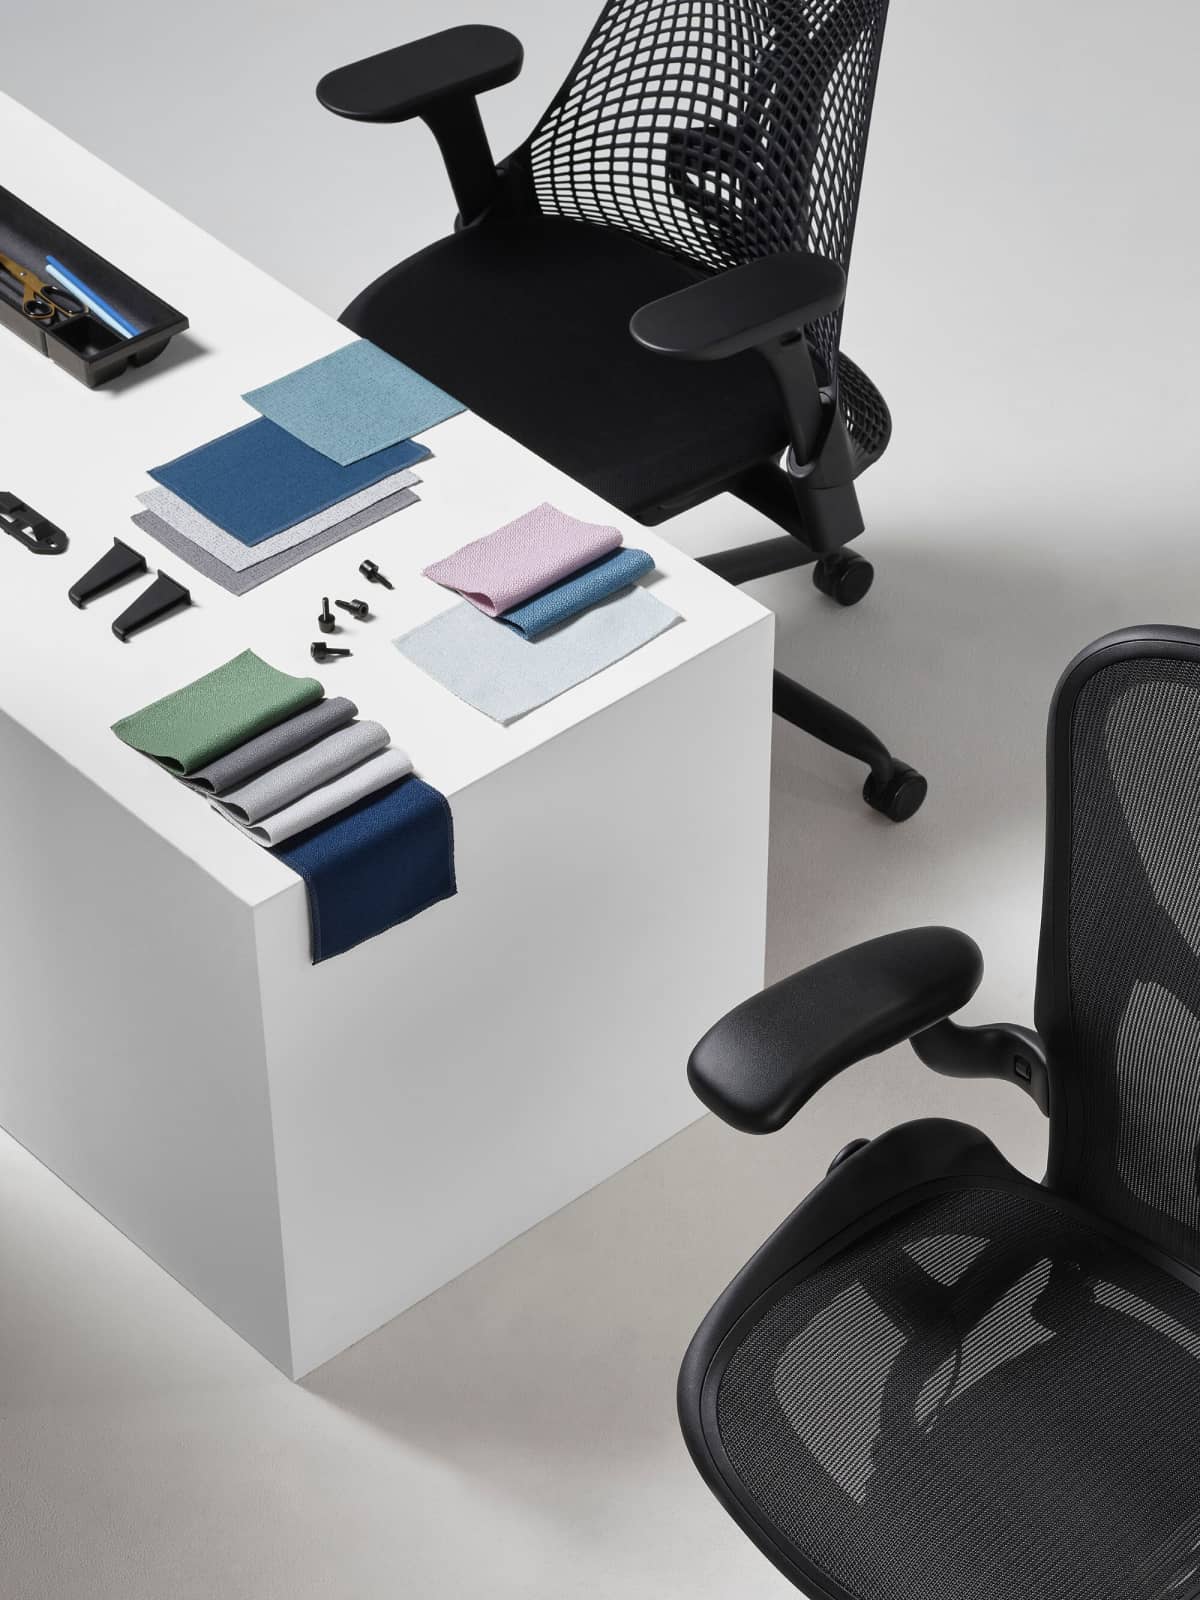 A black Aeron and Sayl office chair, viewed from above, are positioned next to a white display cube, on top of which an arrangement of folded Revenio textile swatches, OE1 trolly plastic clips and a Tu Pedestal Utility Tray made from ocean-bound plastics are all displayed.